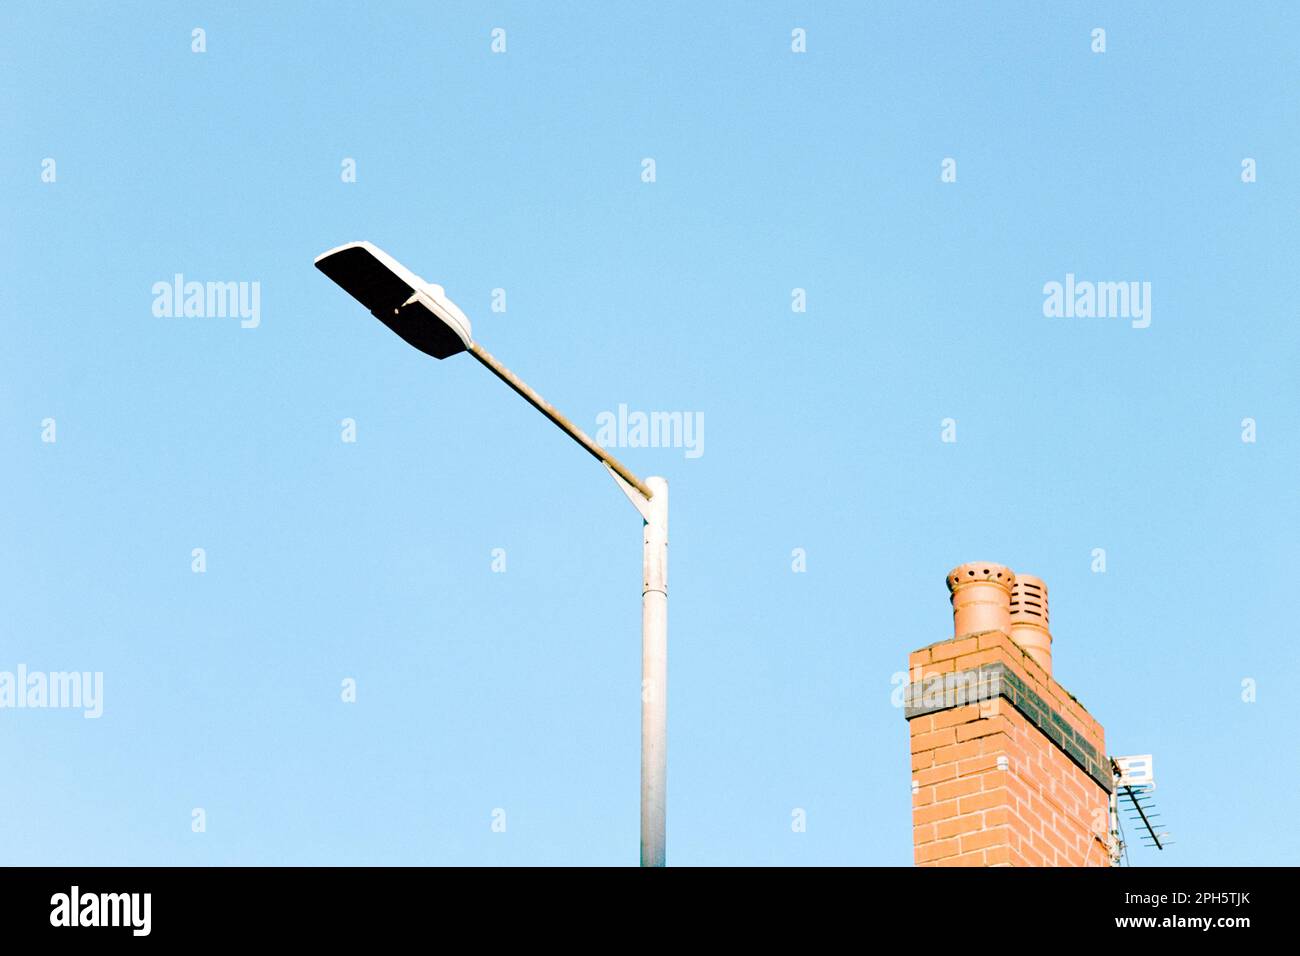 Minimalist photo of a street lamp and chimney from a nearby roof against a blue sky, England, UK, with copy space Stock Photo